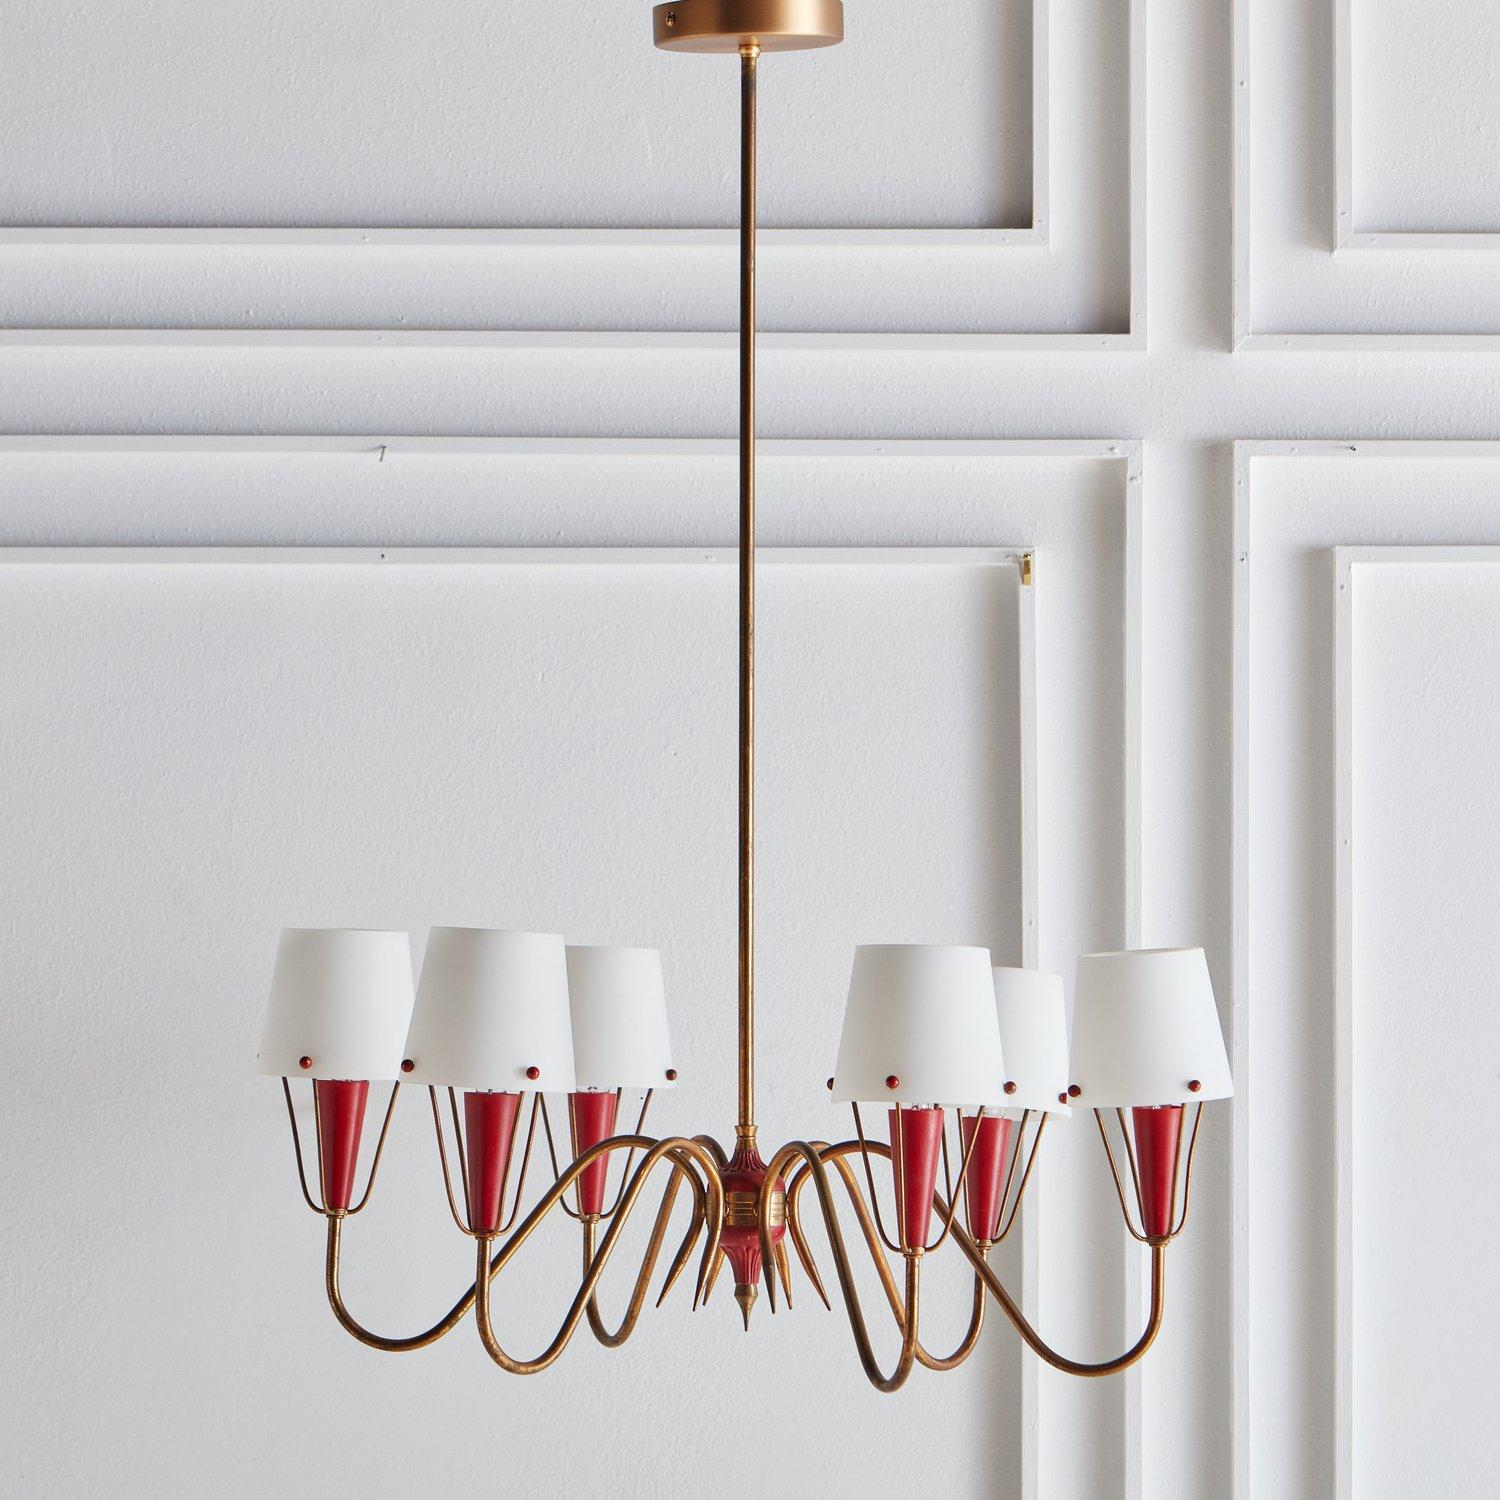 A gorgeous French 1950s patinated brass chandelier with acrylic red accents and six frosted glass shades. It has a brass stem and a new brushed brass canopy. This chandelier reminds us of the elegant style of French designer Jean Royère. Sourced in